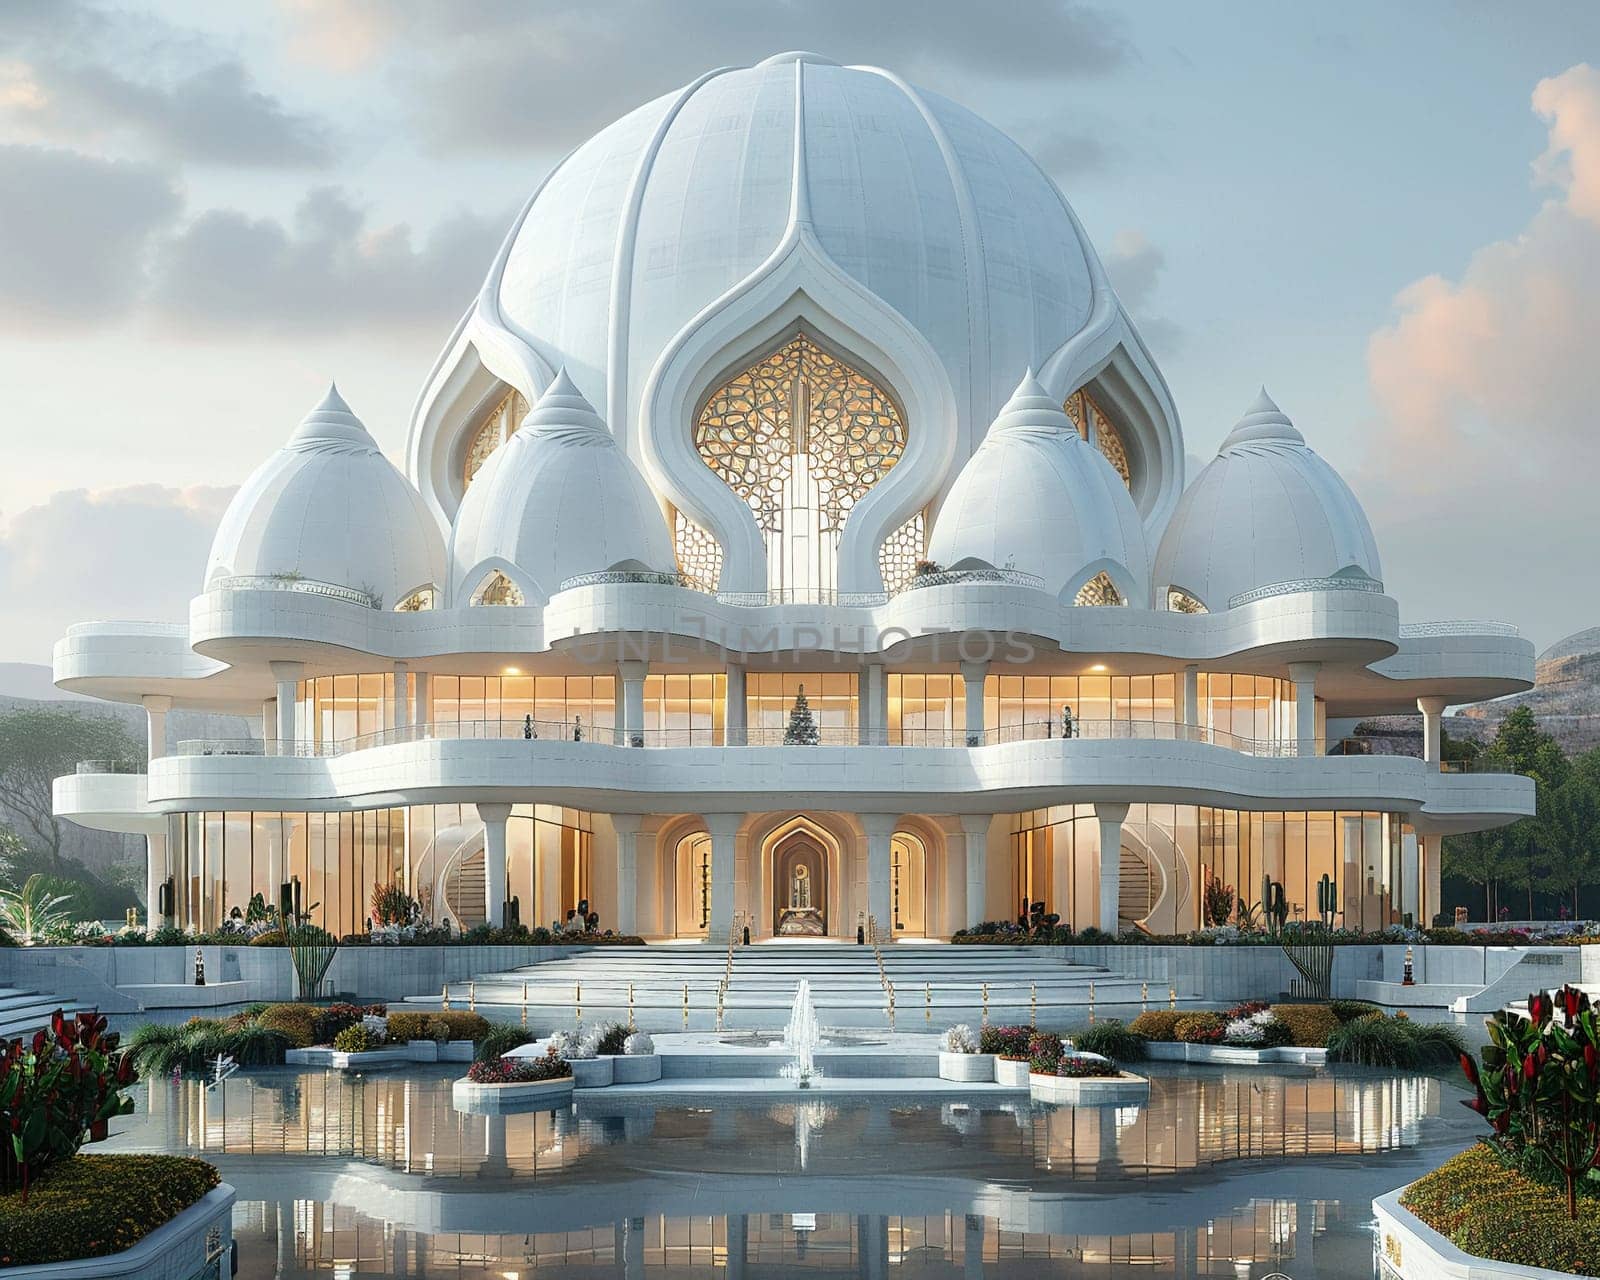 Bahai House of Worship Dome Rising into Soft Skies The temples form blurs upward by Benzoix